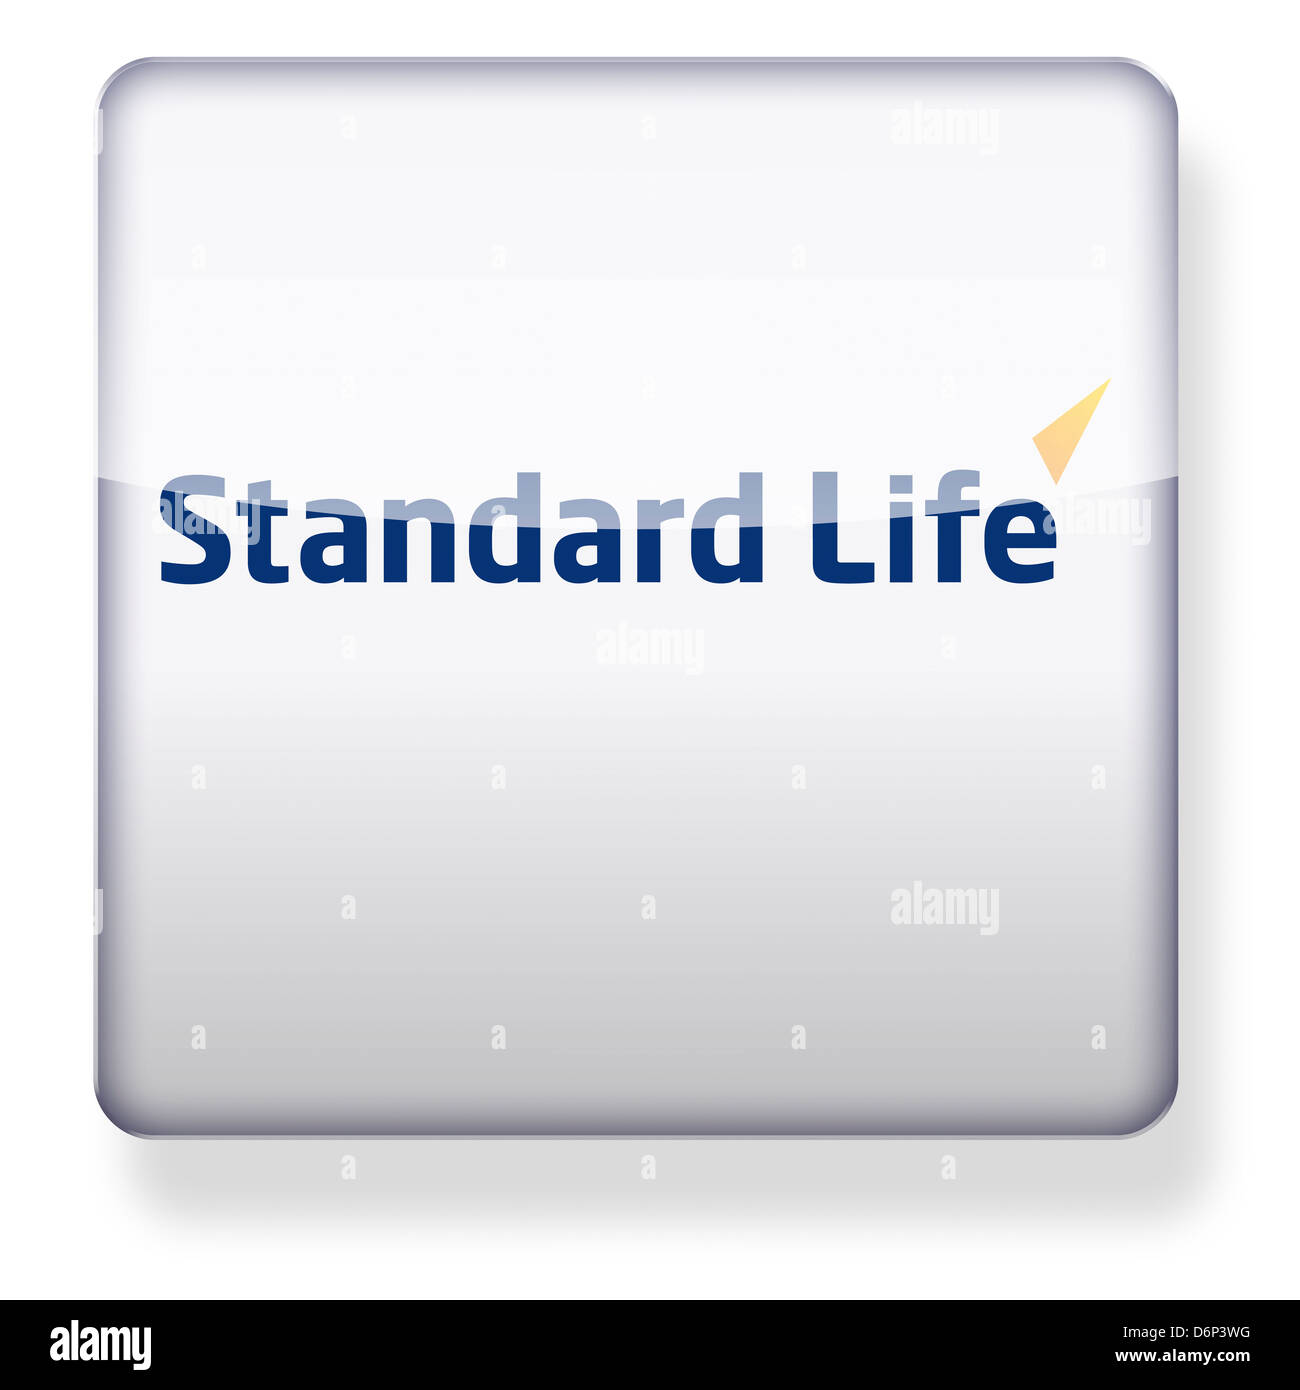 Standard Life logo as an app icon. Clipping path included. Stock Photo